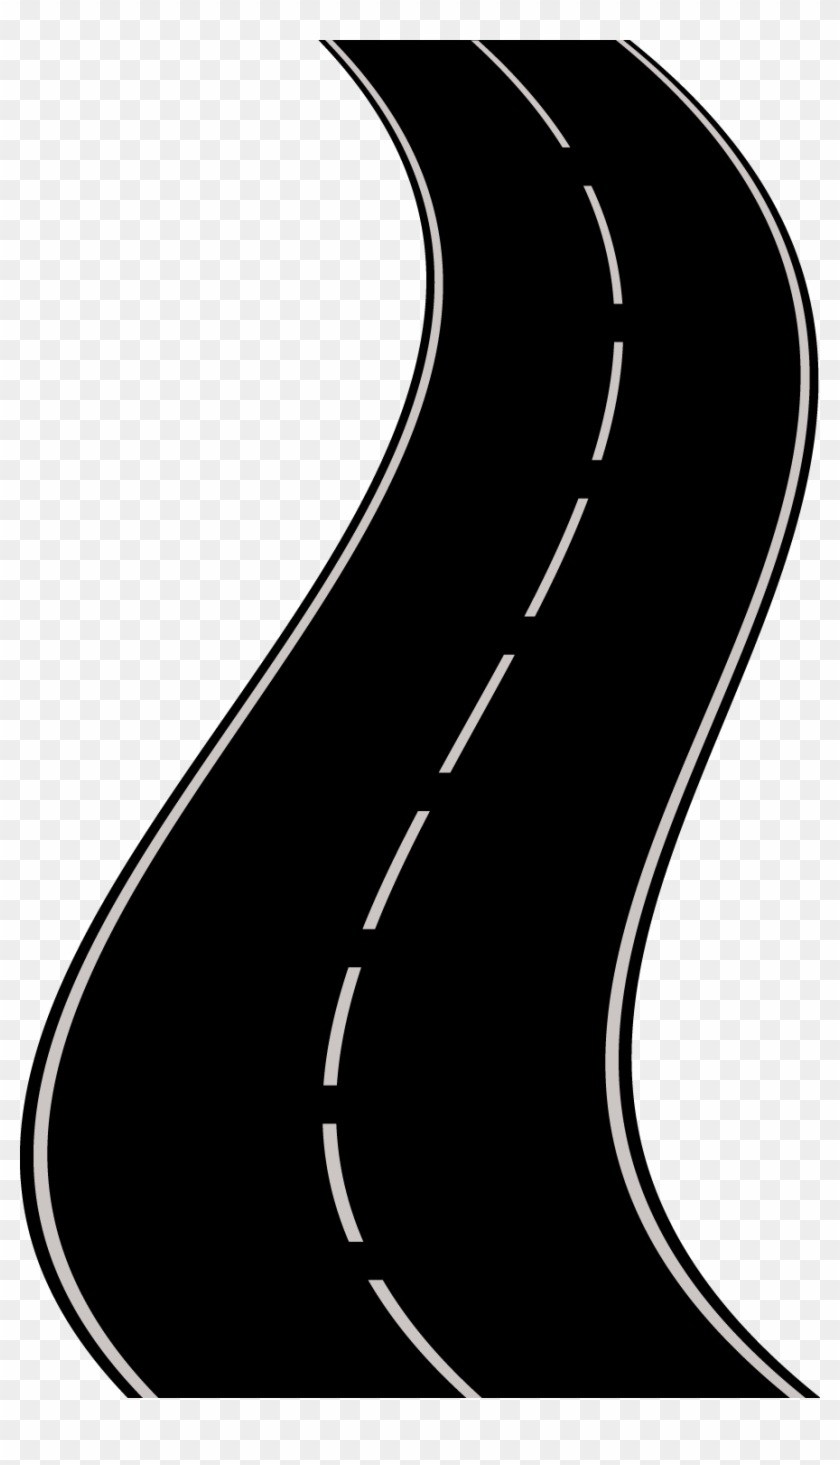 Road Highway Animation - Animated Curvy Road Clipart #3607793